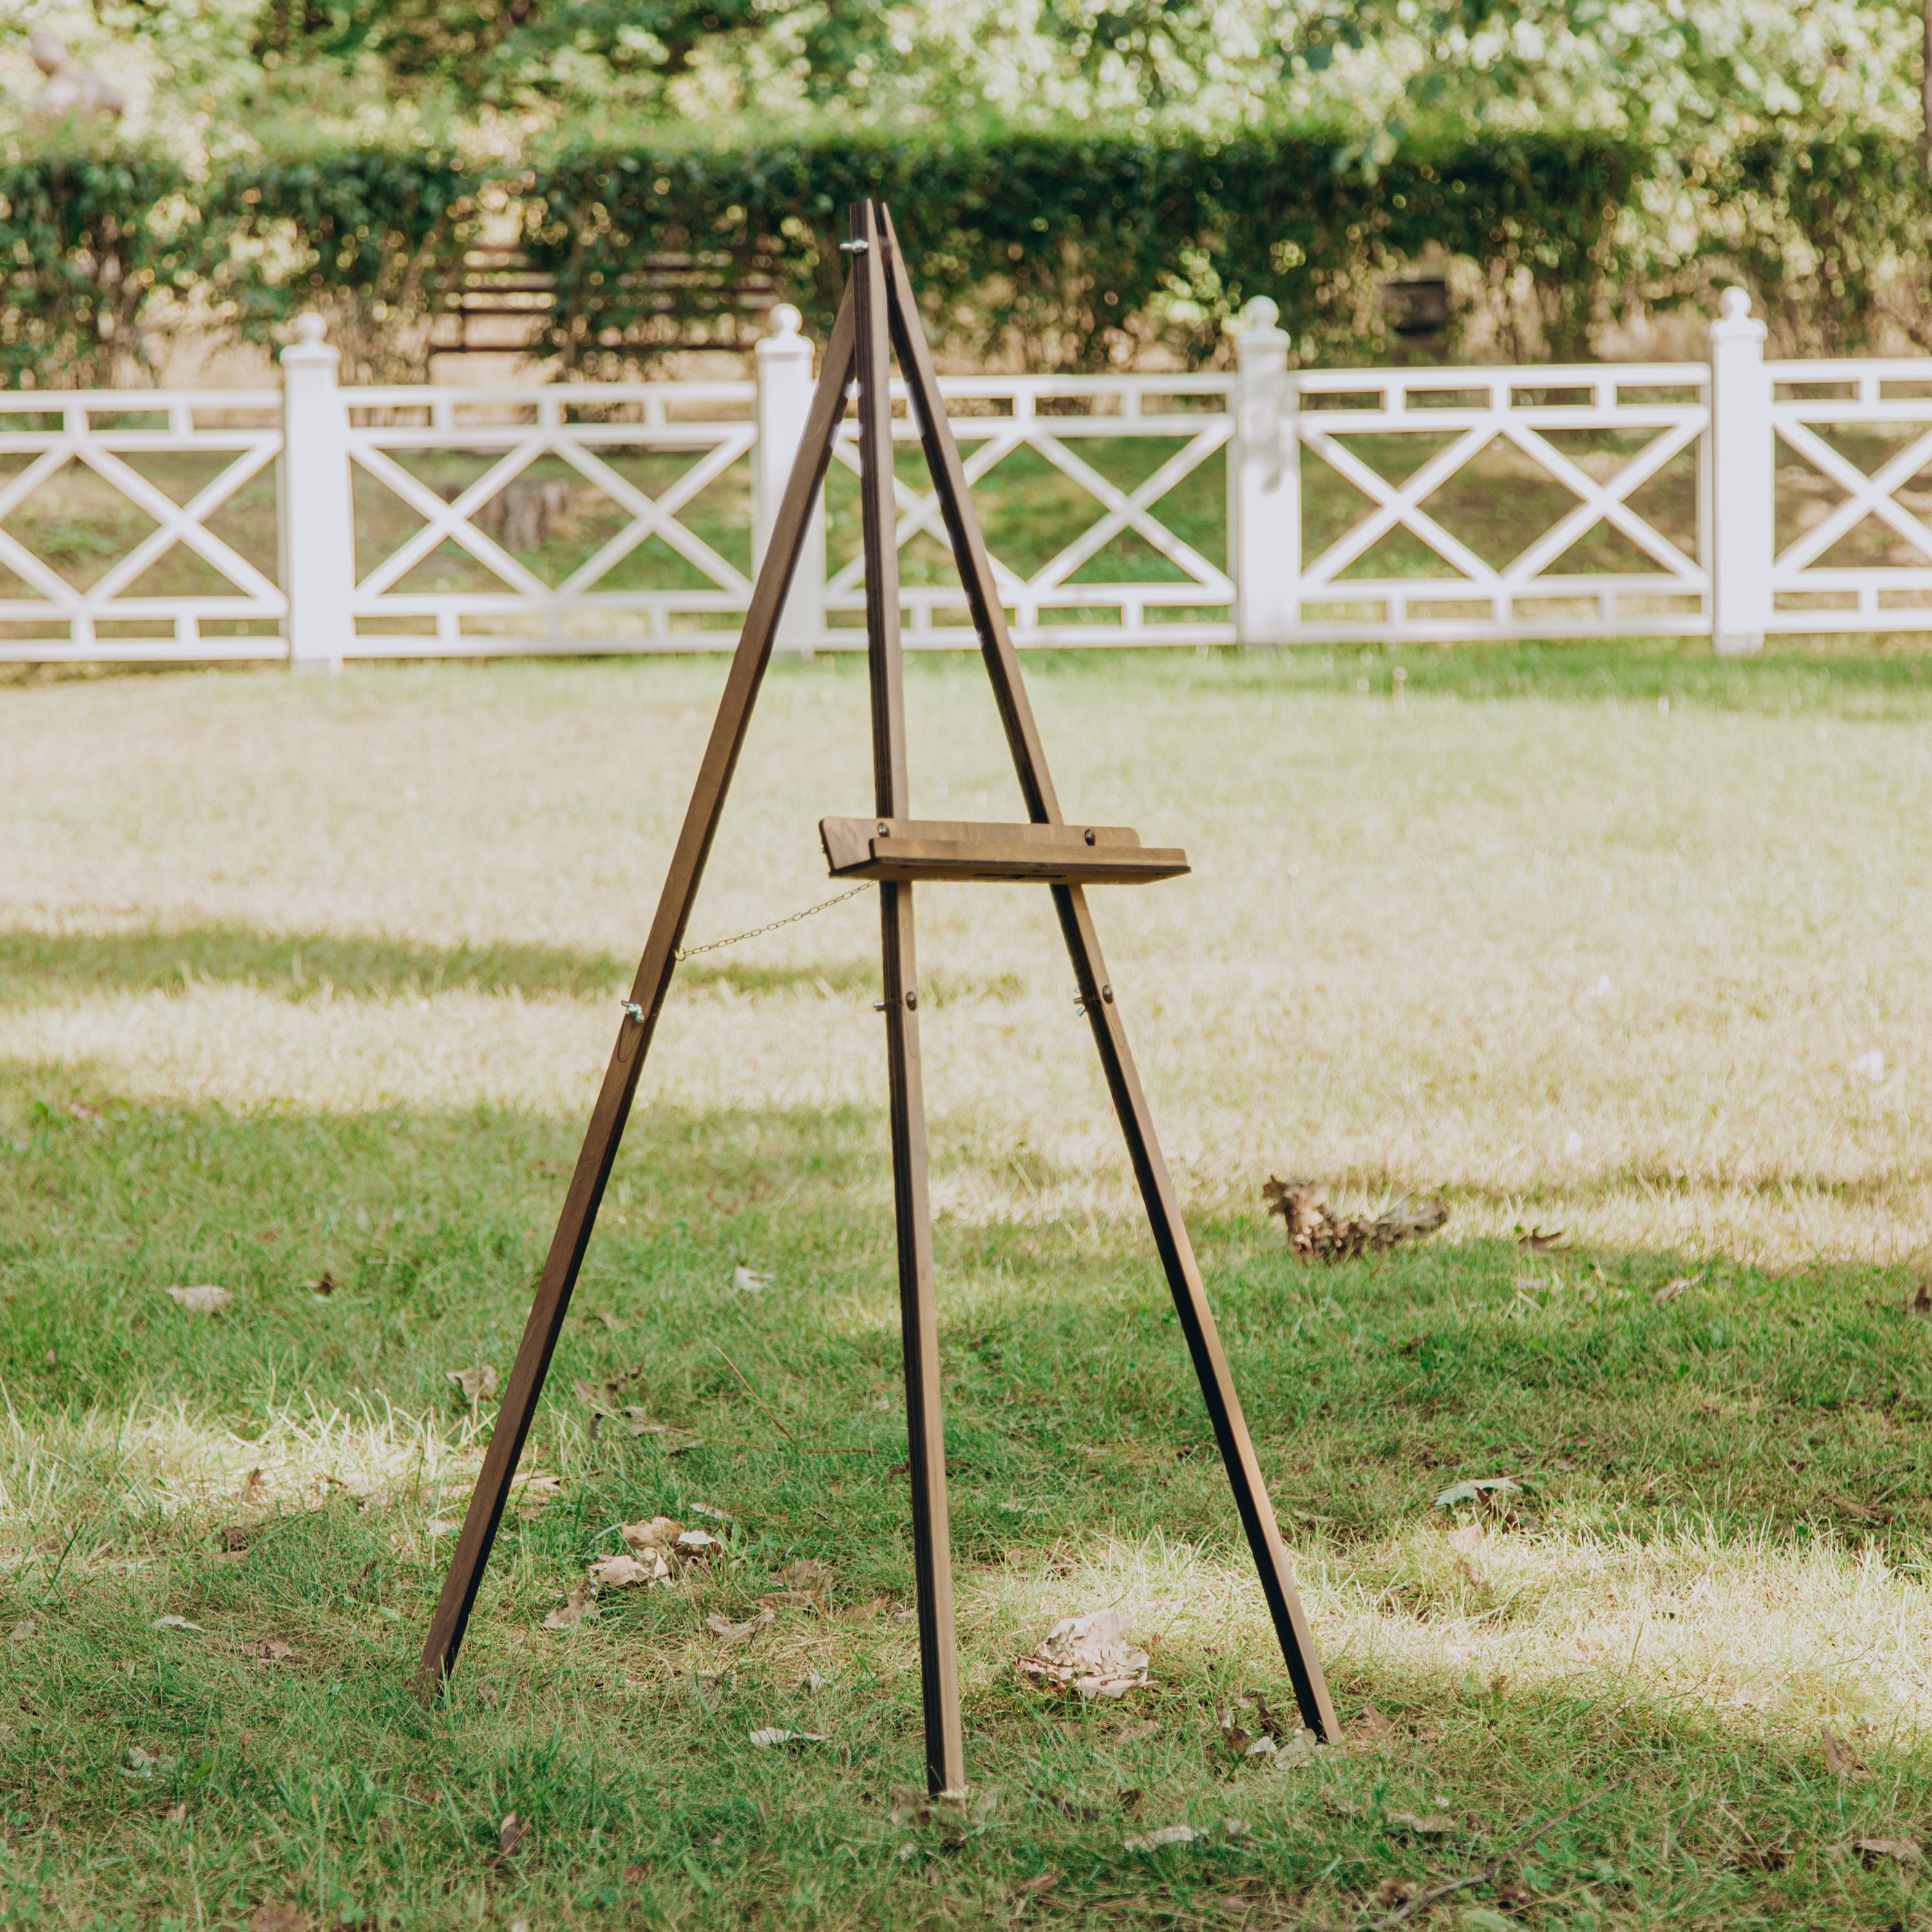 Wooden Easel for Sketching and Painting or Use as a Display Easel wedding  Plans Etc Blackboard Holder, S1 Blue 